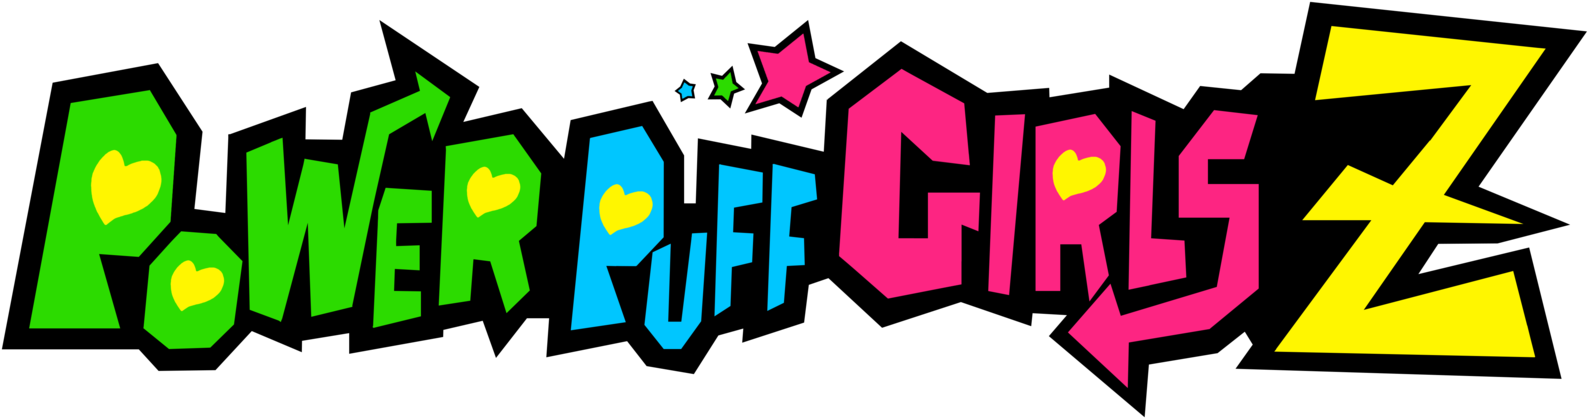 Image Power Puff Girls Z Logo Vector By Greenmachine987 - Powerpuff Girls Z Logo (1600x436)